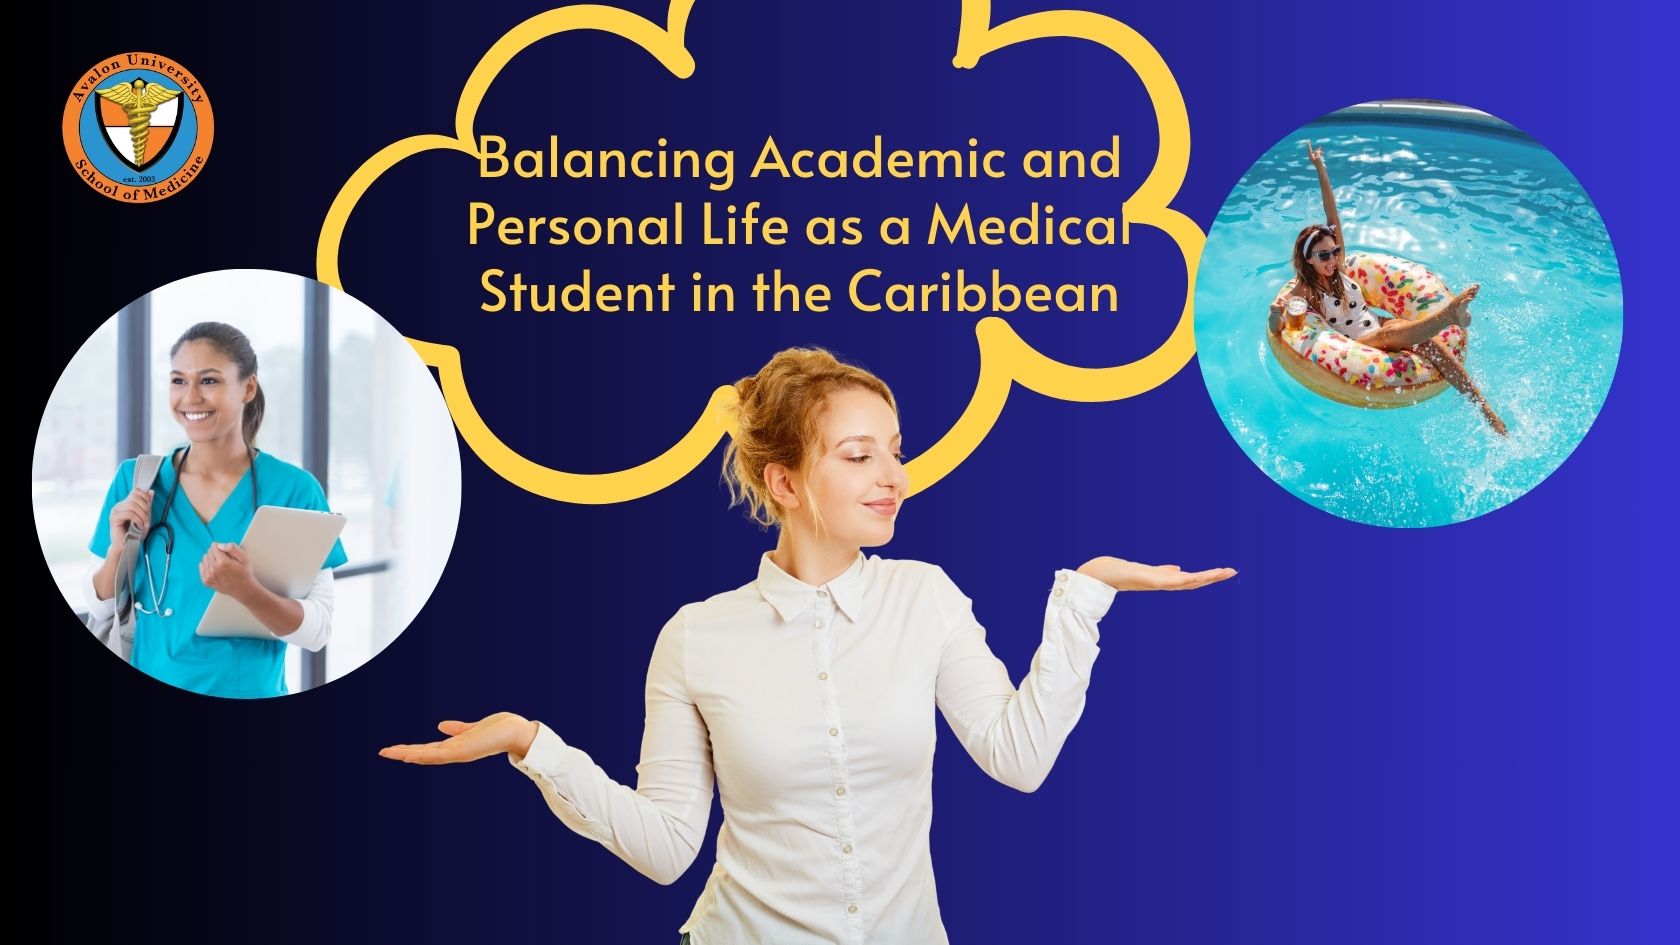 Balancing Academic and Personal Life as a Medical Student in the Caribbean